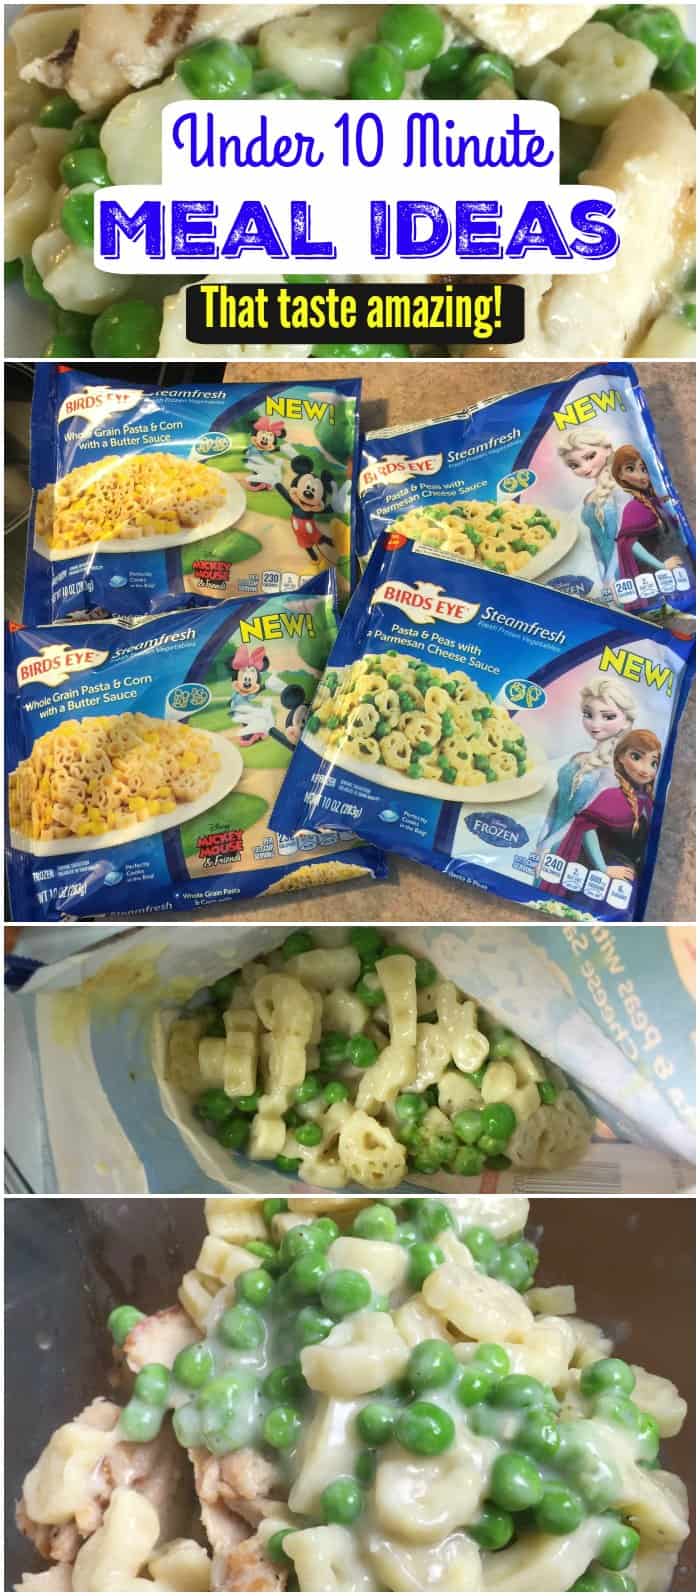 Under 10 Minute Quick Meal Ideas for Families